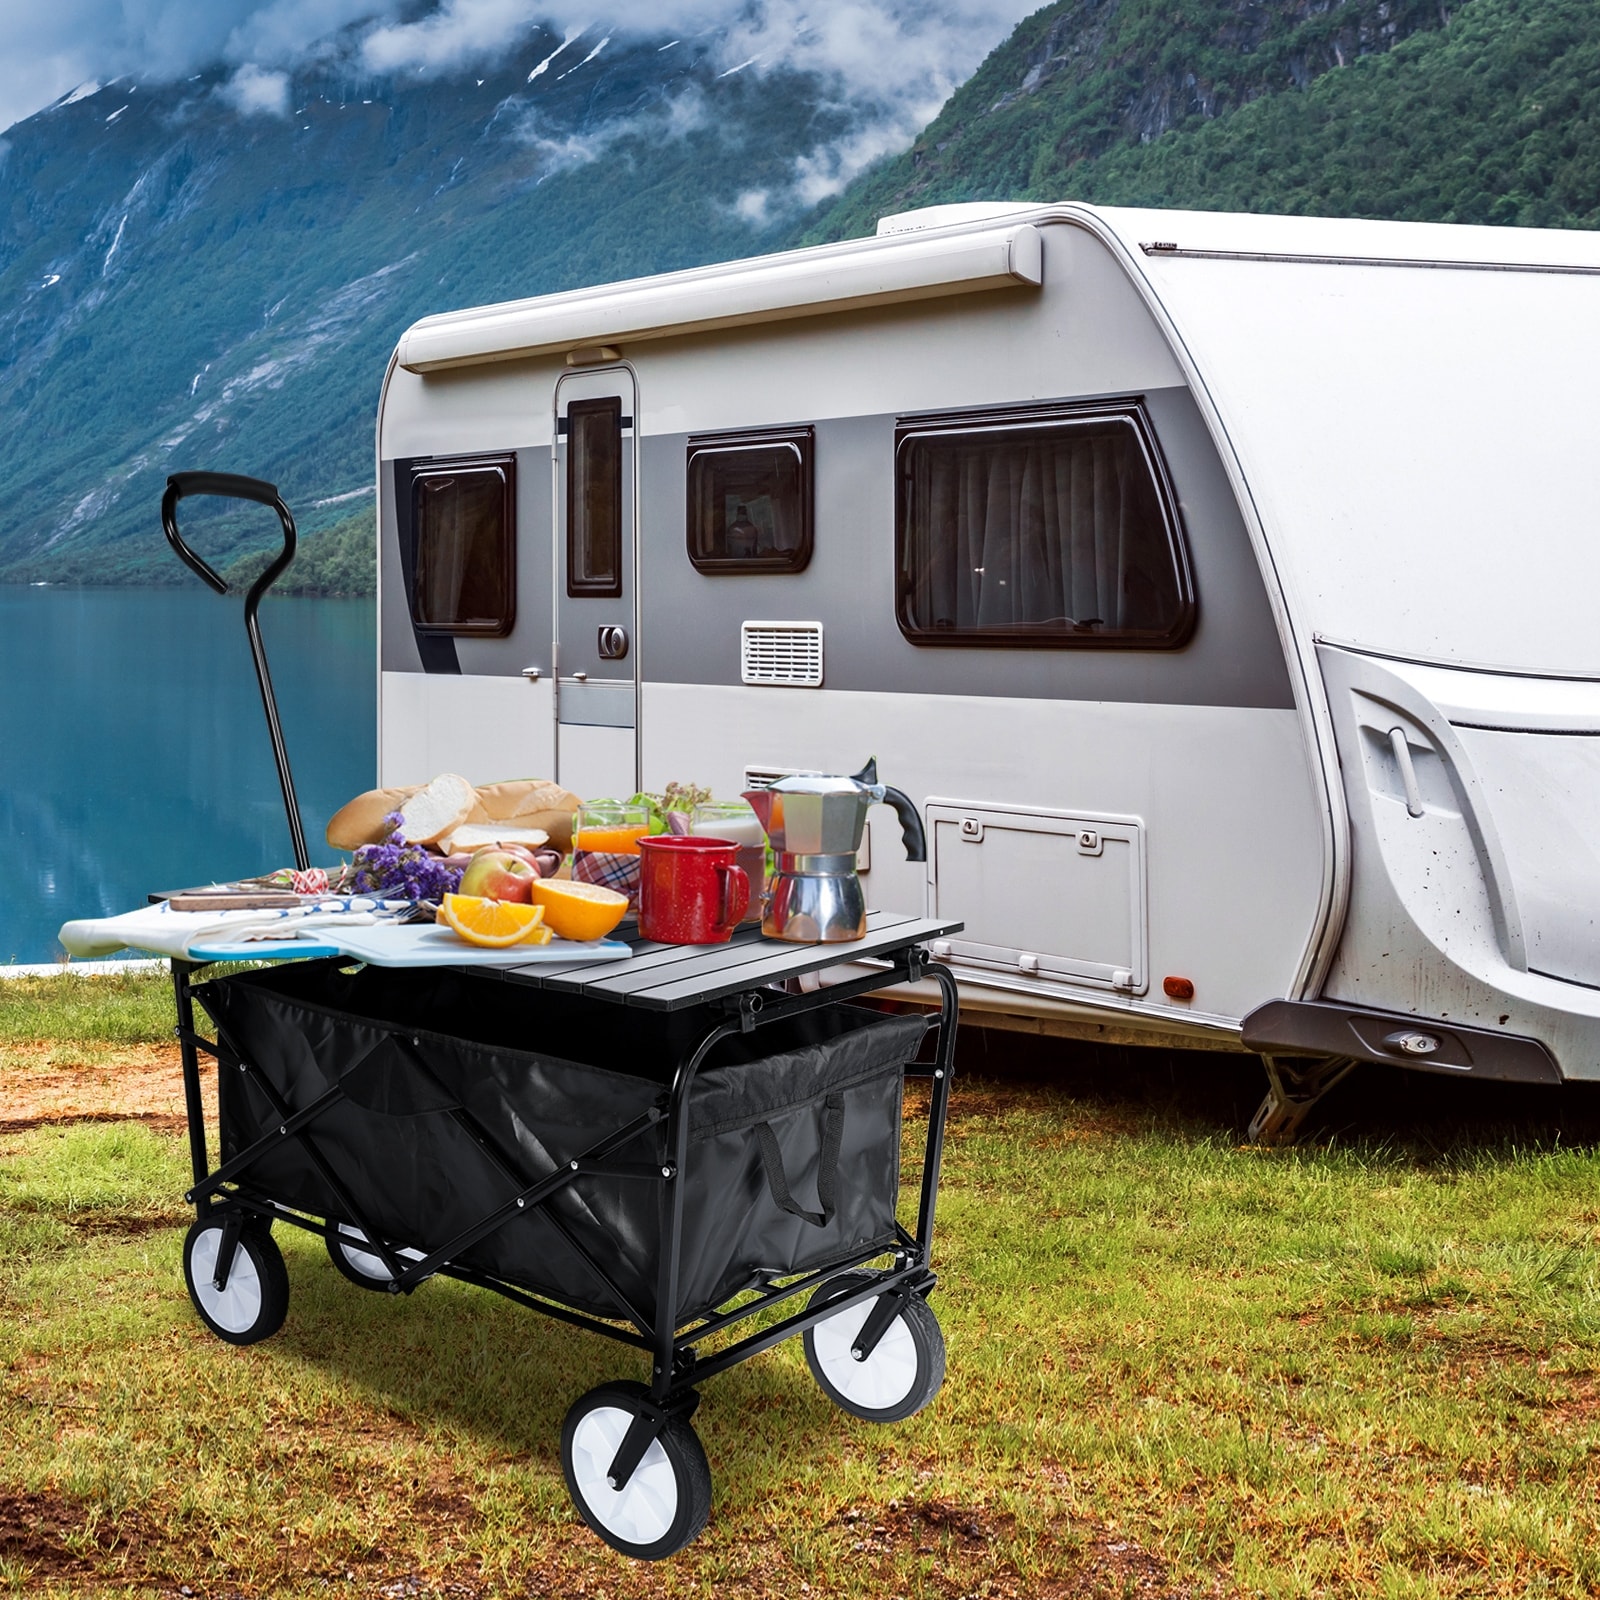 https://ak1.ostkcdn.com/images/products/is/images/direct/ab21474d20d8d9365af2176f0517e3ee470c5360/35-inch-Heavy-Duty-Portable-Folding-Wagon-and-Collapsible-Outdoor-Camping-Cart-%2C-Black.jpg